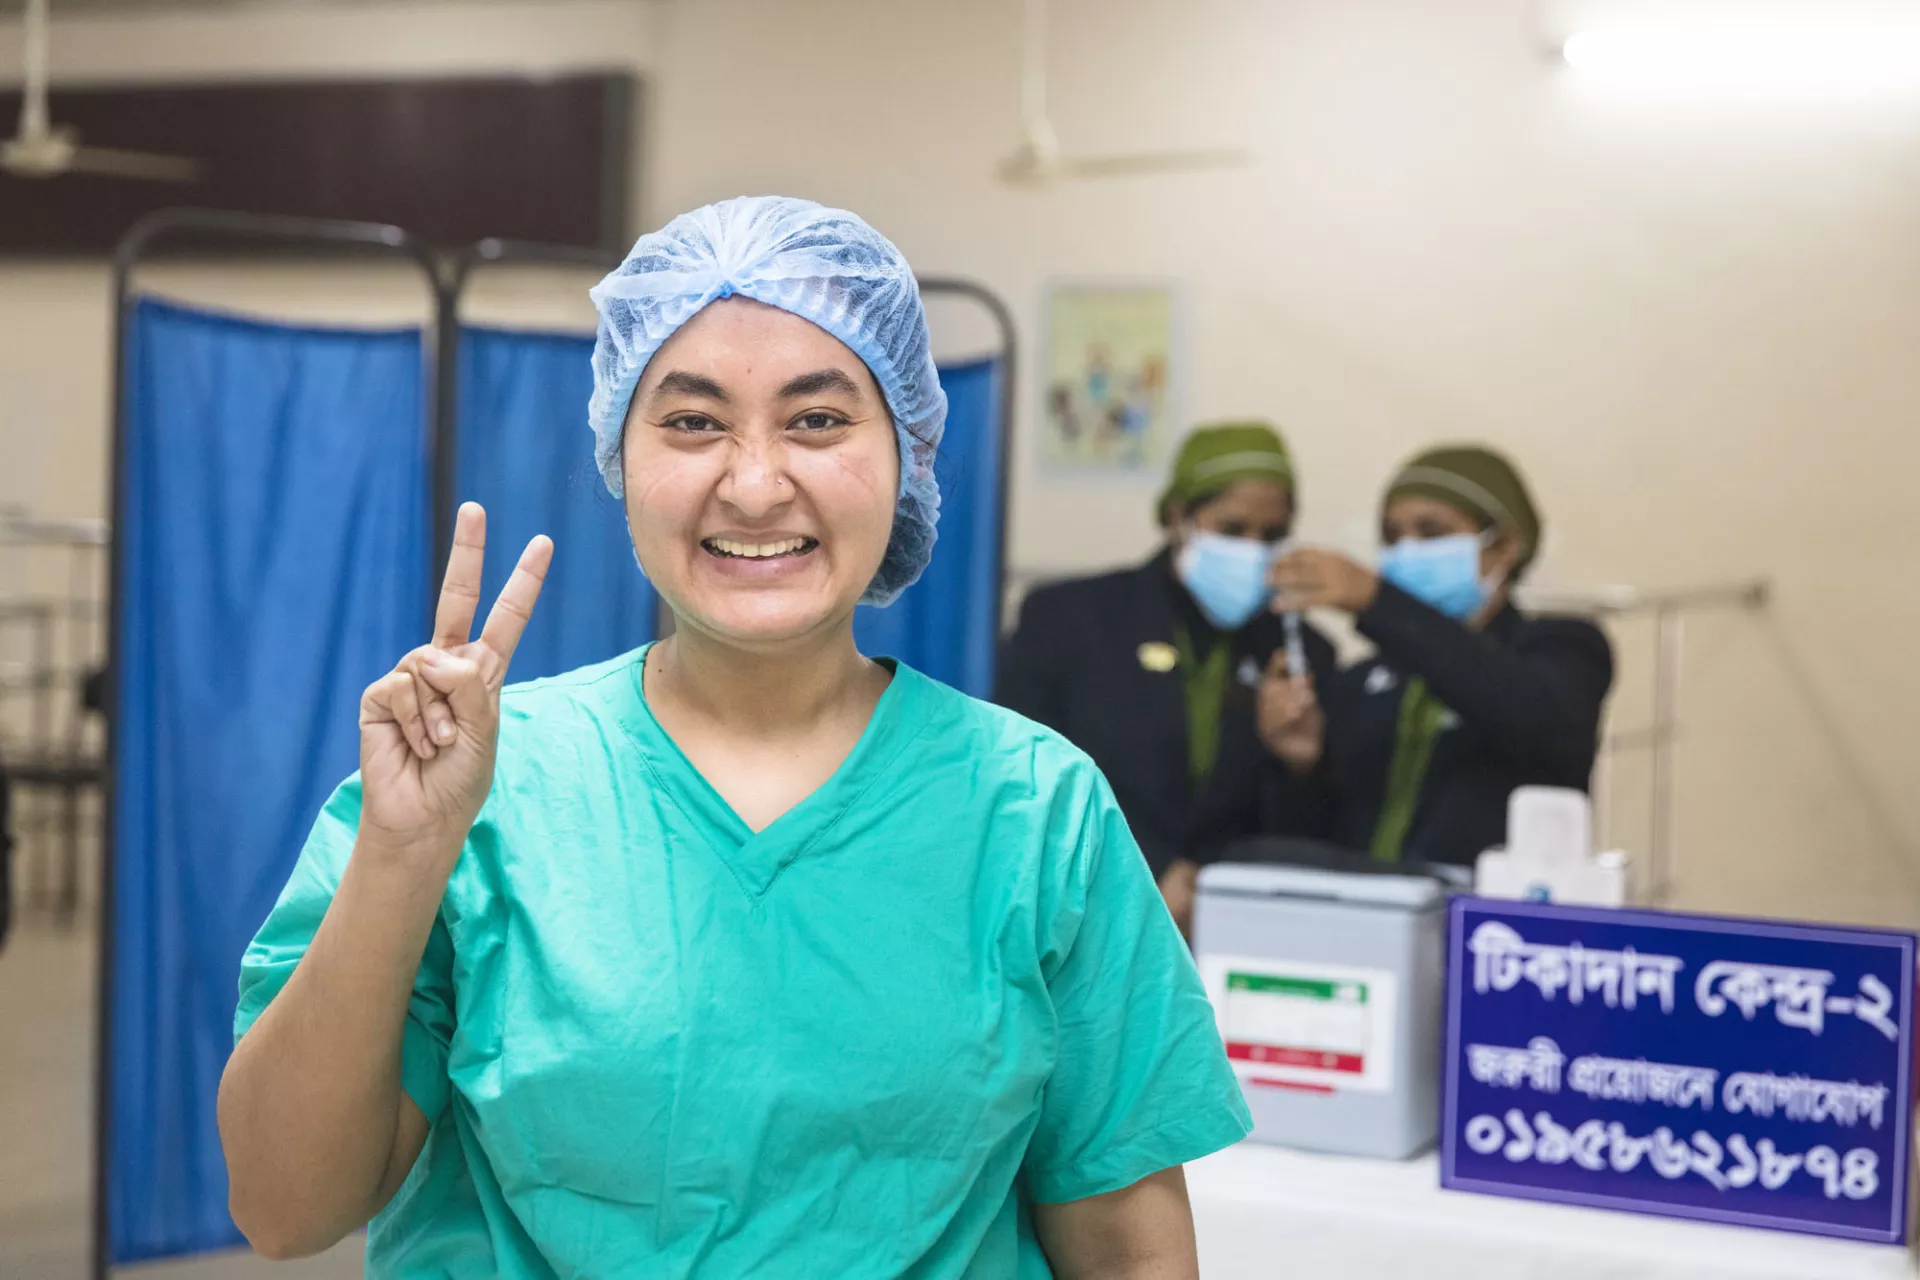 Nurse Ismat Jahan Sarker holds up the 'v' sign after receiving the COVID-19 vaccine at Kurmitola General Hospital in Dhaka, Bangladesh.